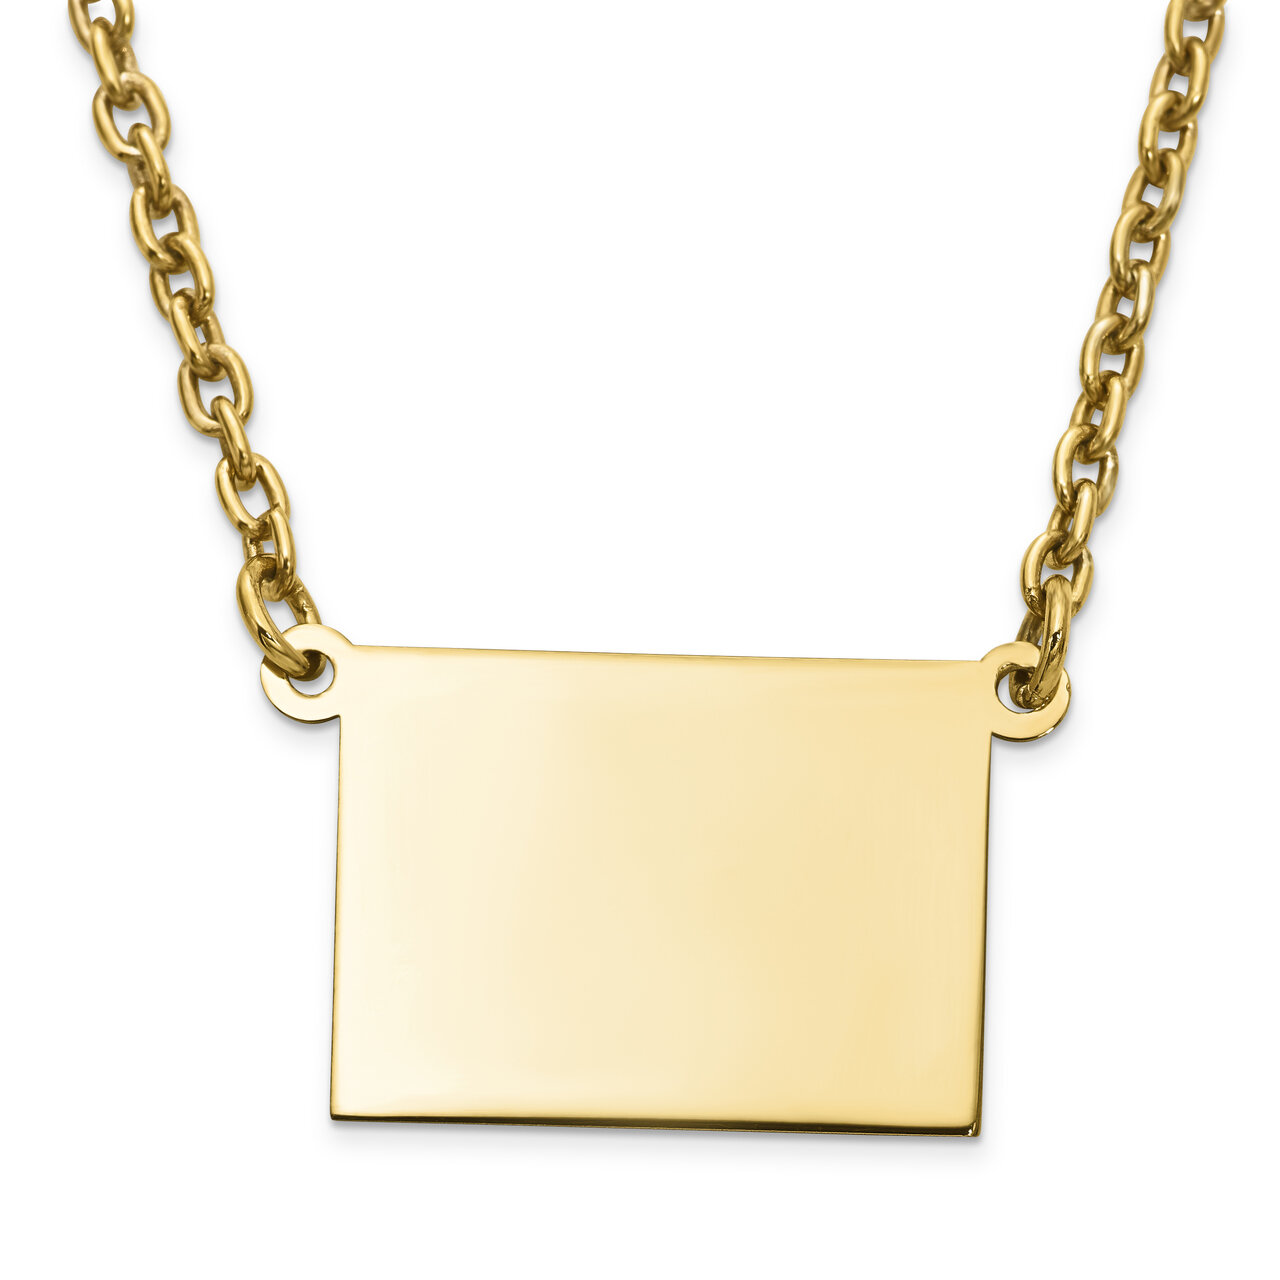 Colorado State Pendant Necklace with Chain 14k Yellow Gold Engravable XNA706Y-CO